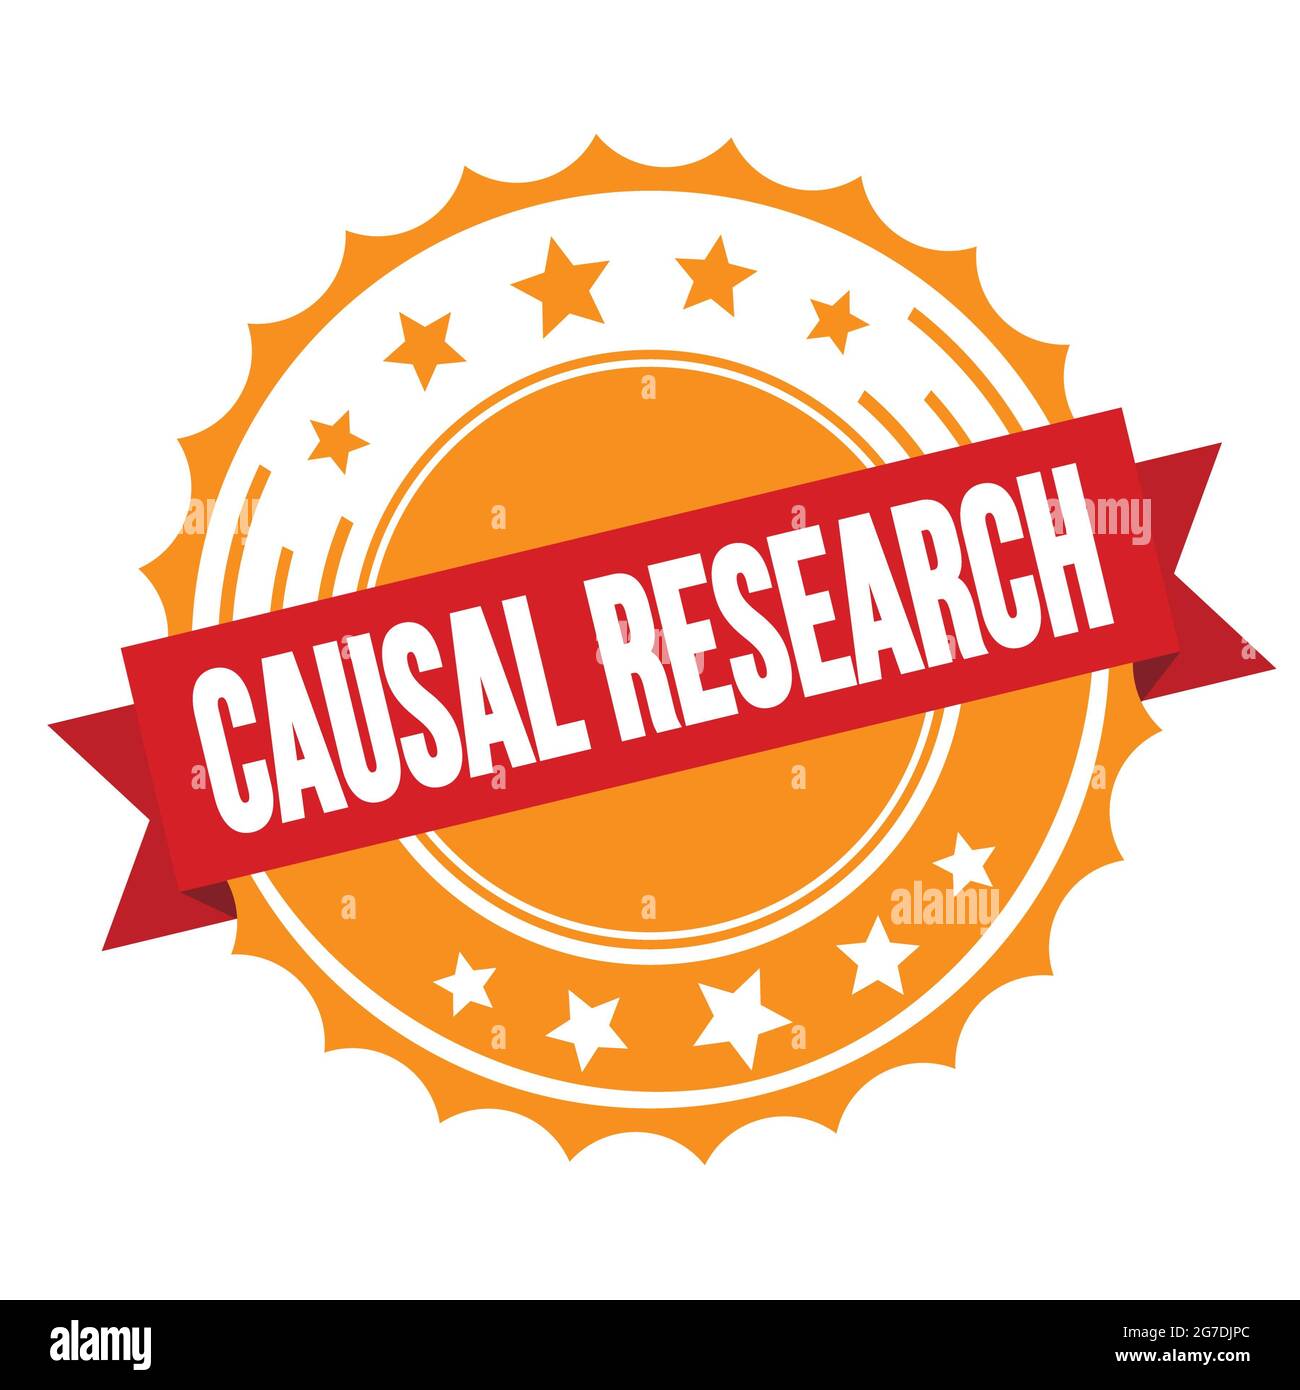 CAUSAL RESEARCH text on red orange ribbon badge stamp. Stock Photo